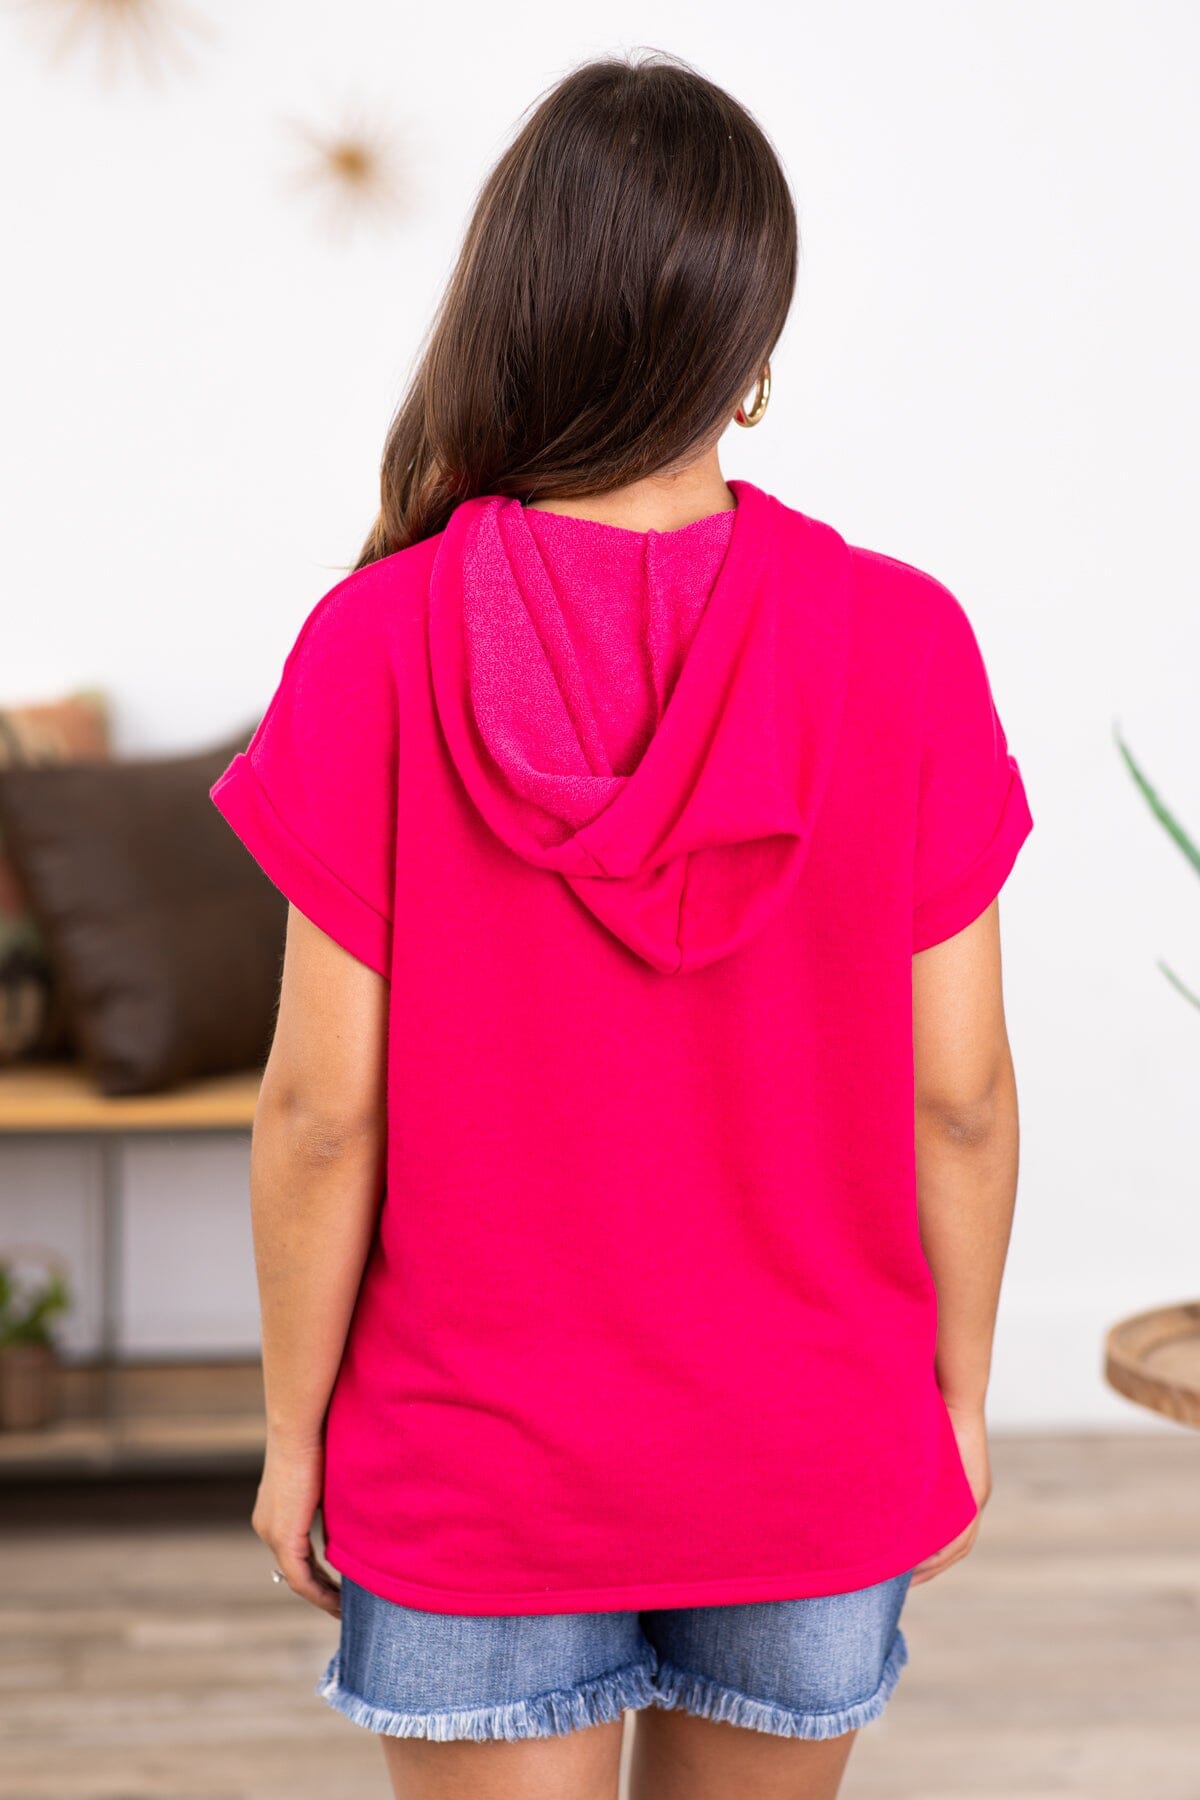 Hot Pink Short Sleeve Hooded Top - Filly Flair